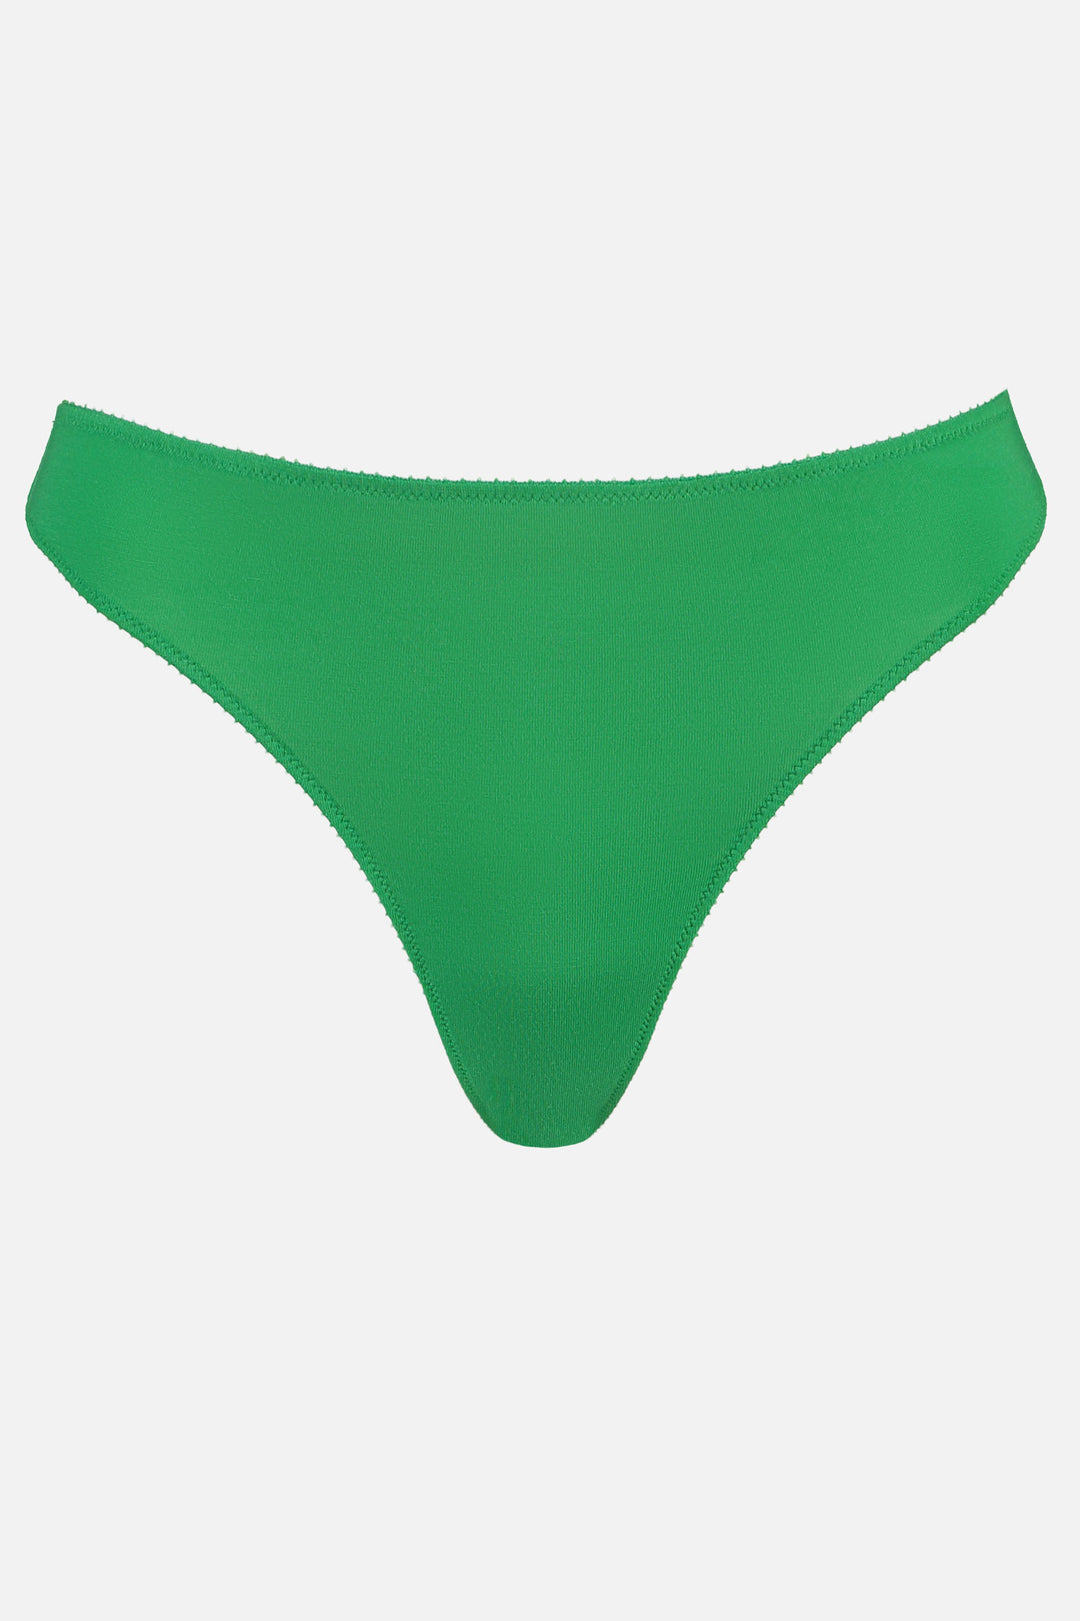 Videris Lingerie bikini knicker in green TENCEL™ a comfortable mid-rise style cut to follow the natural curve of your hips